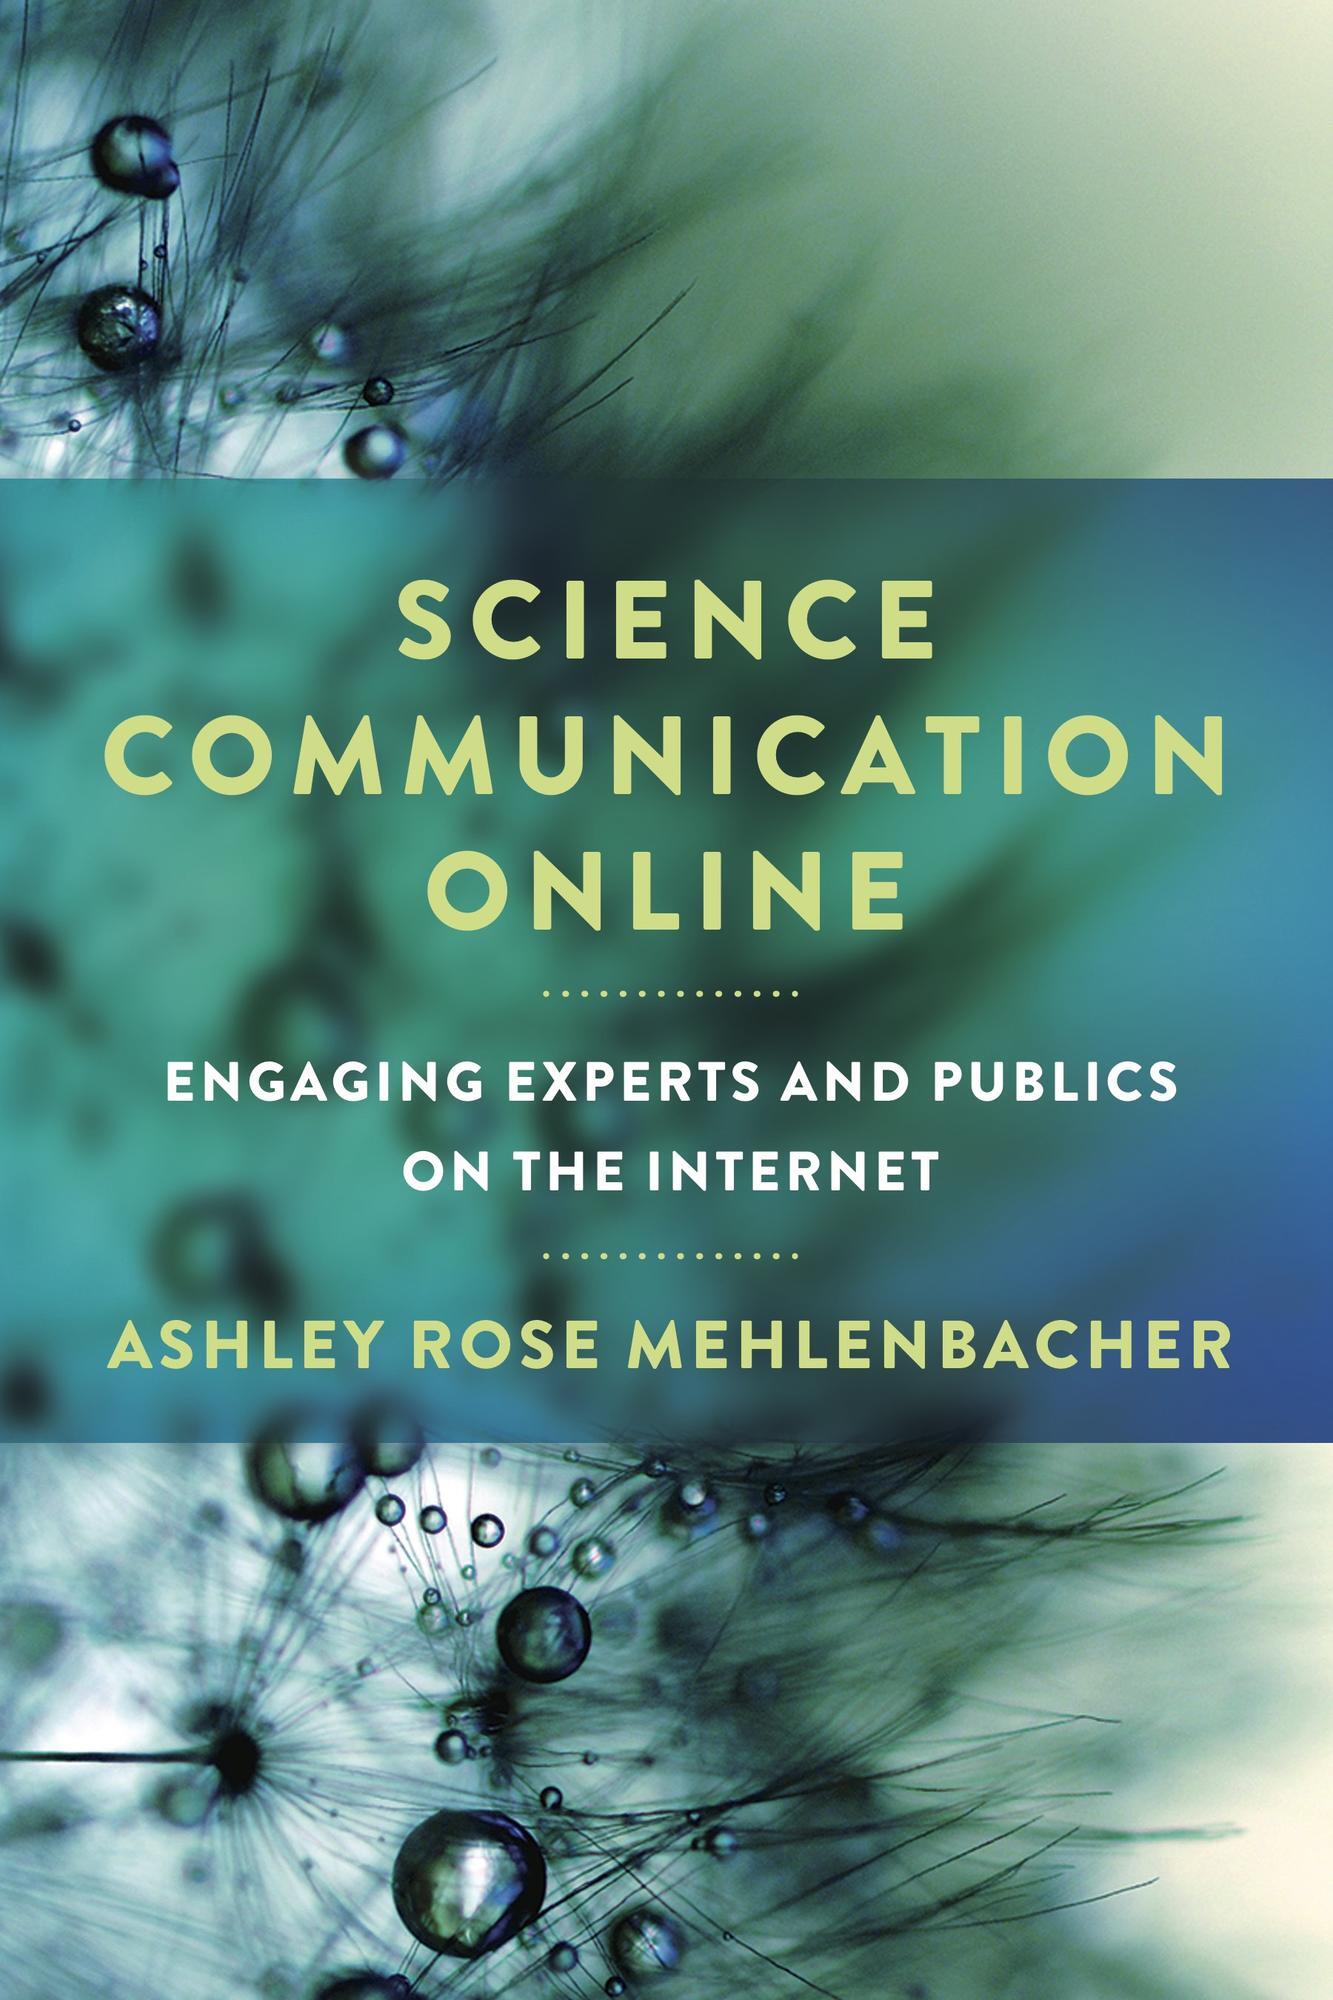 Cover of Science Communication Online. Green with yellow text.